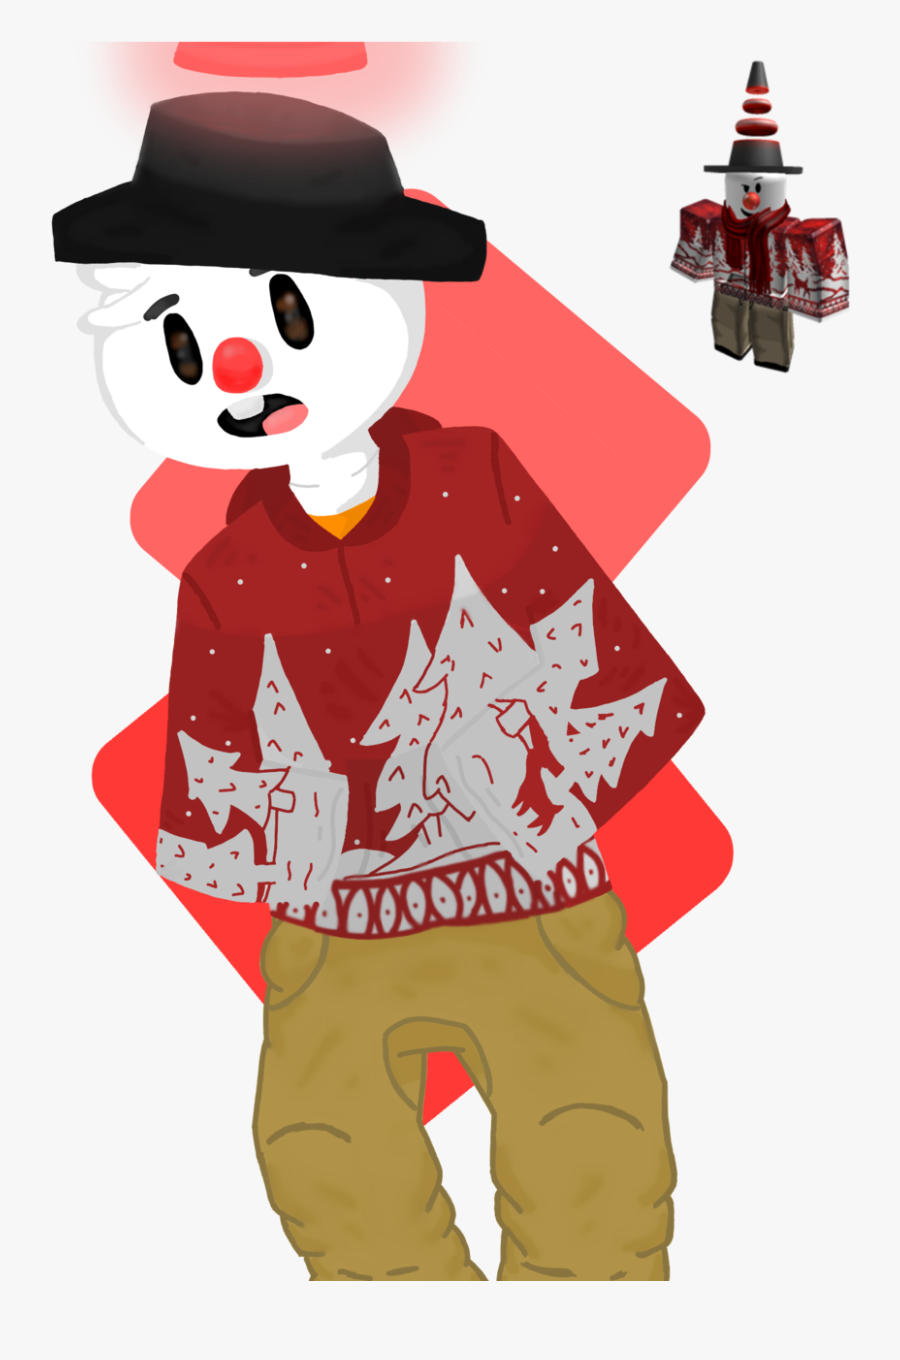 My Roblox Avatar B Illustration Free Transparent Clipart Clipartkey - roblox drawing avatar avatar transparent background png clipart